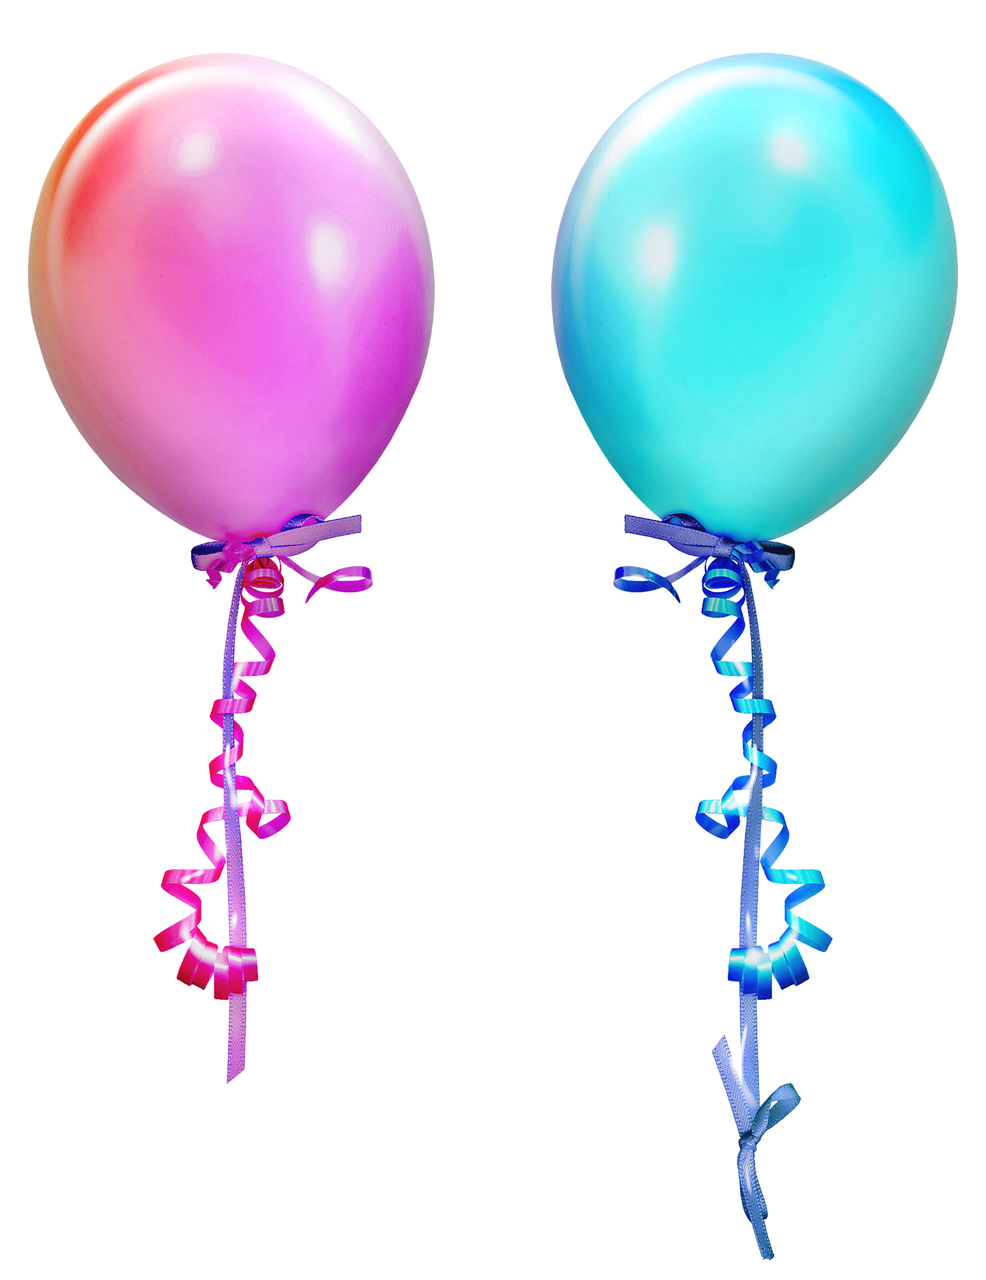 Balloons Confetti PNG Free Download